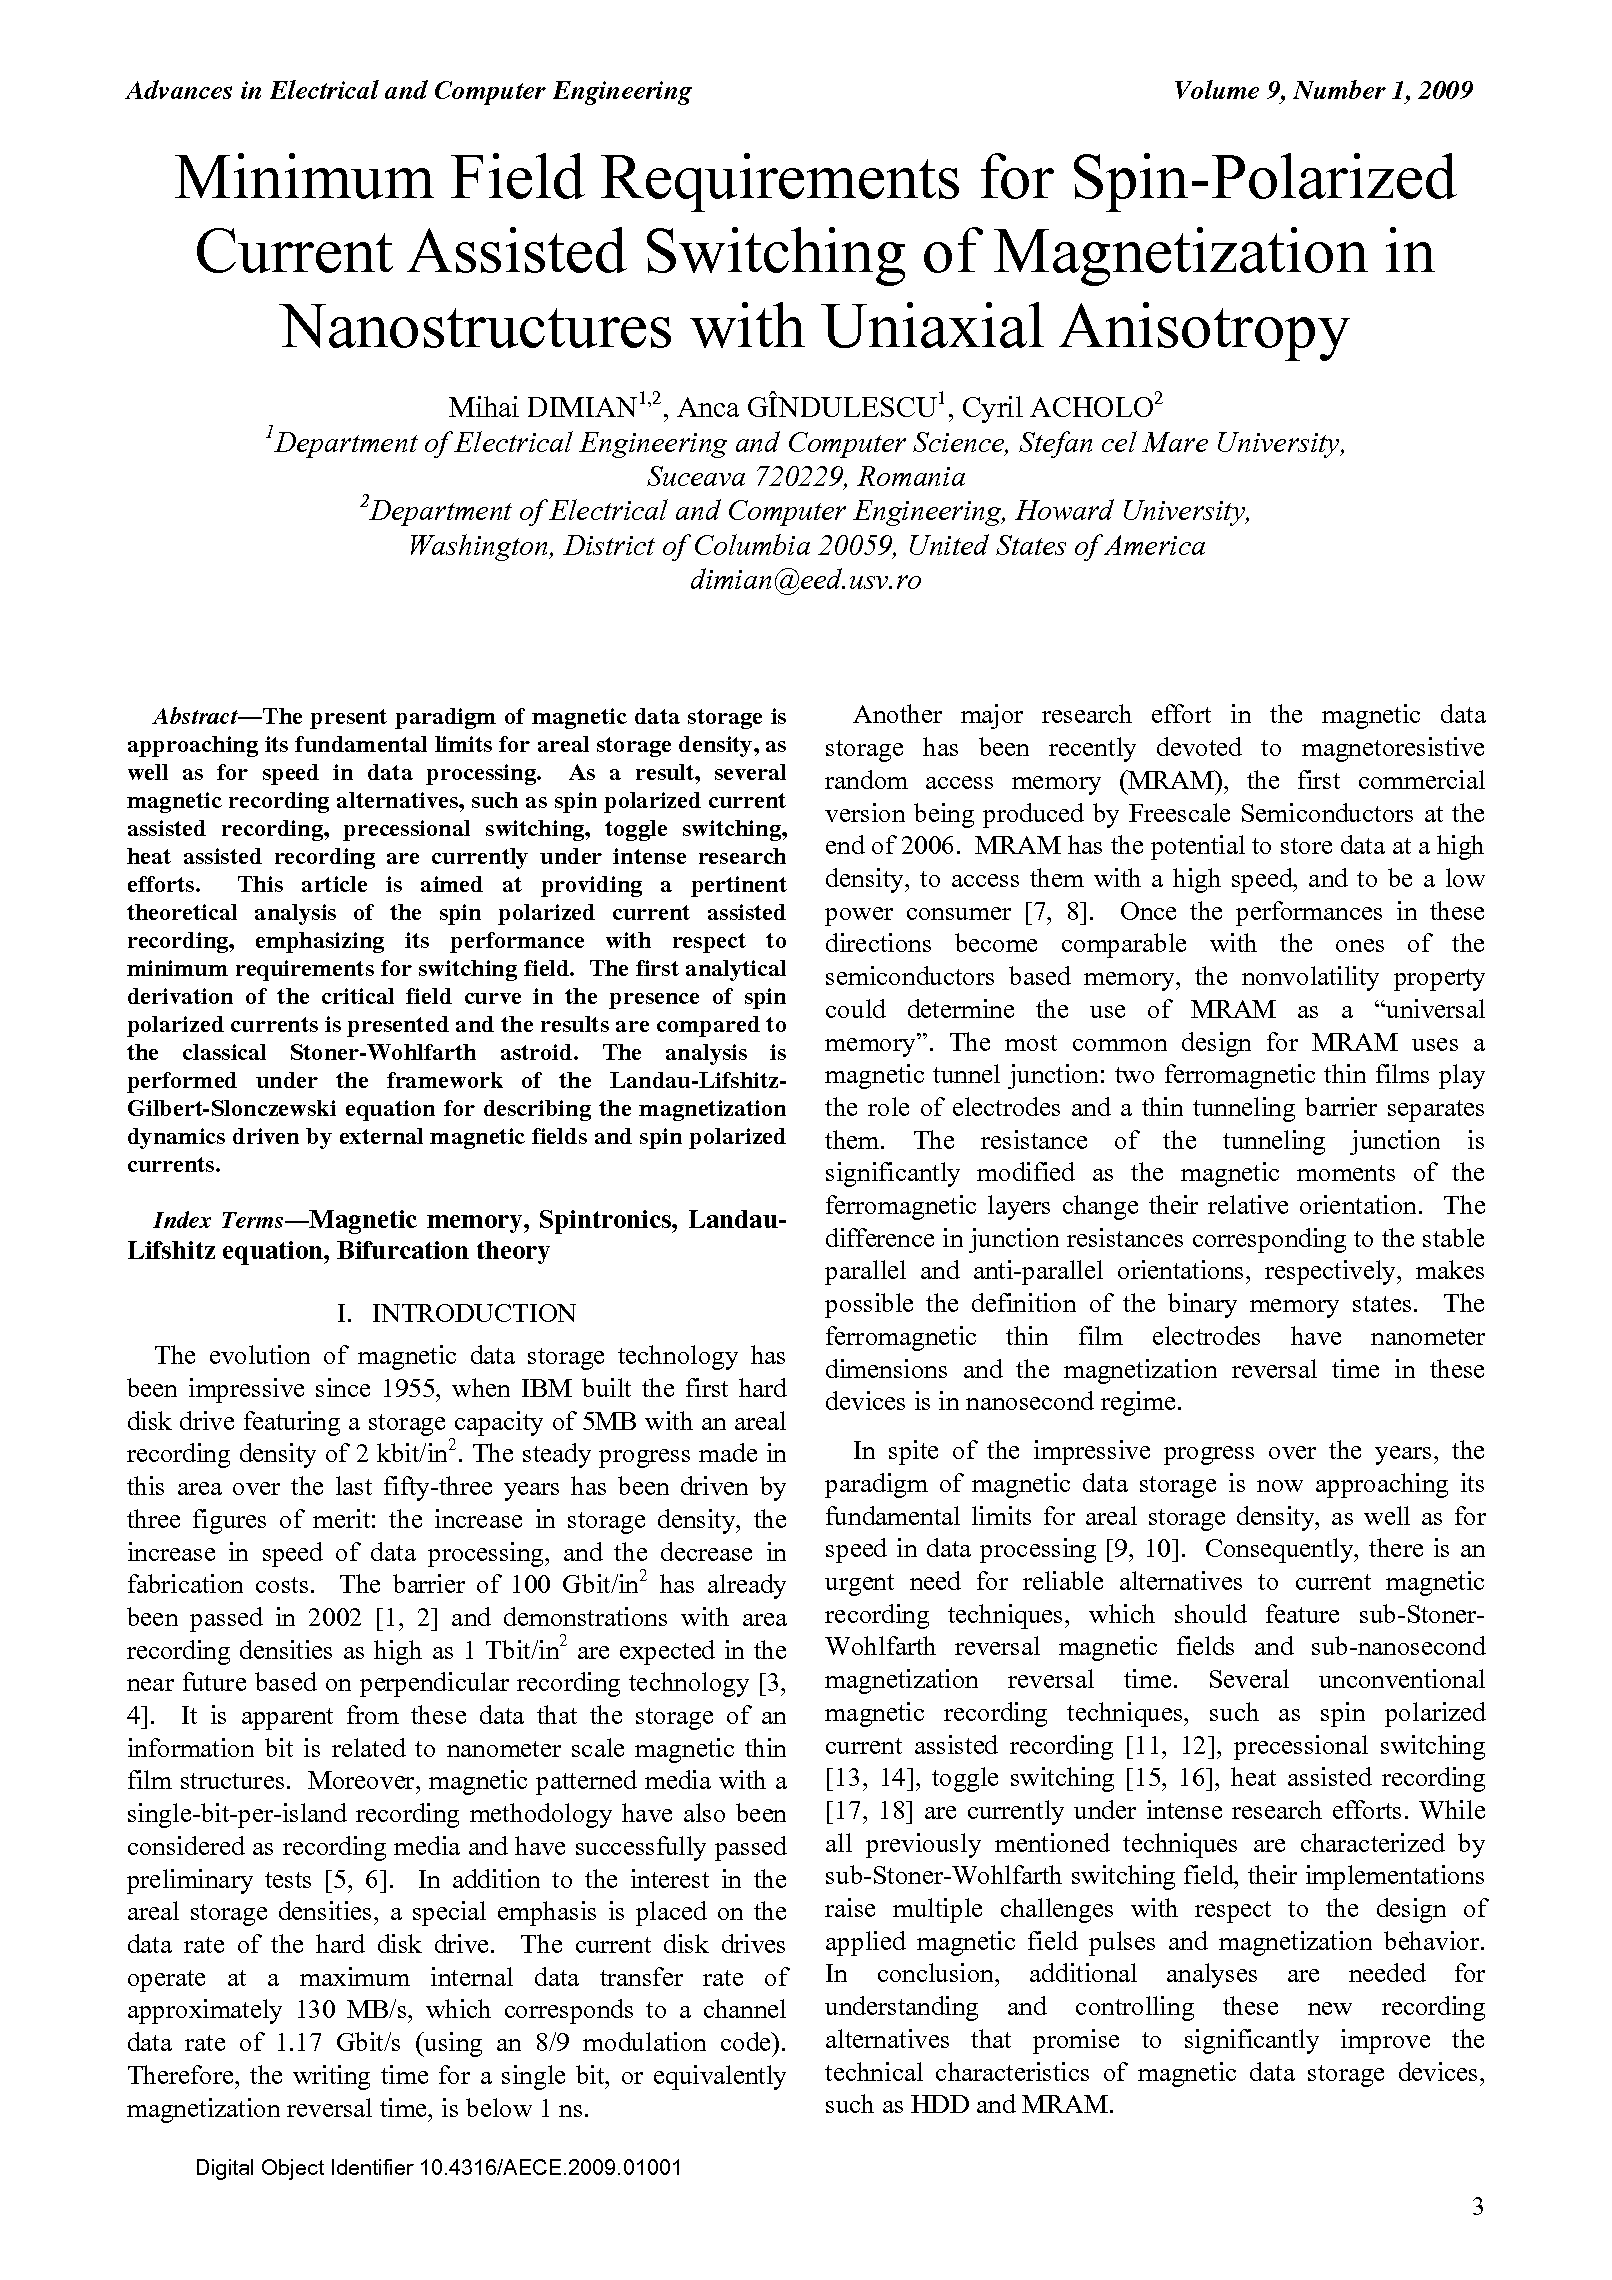 PDF Quickview for paper with DOI:10.4316/AECE.2009.01001